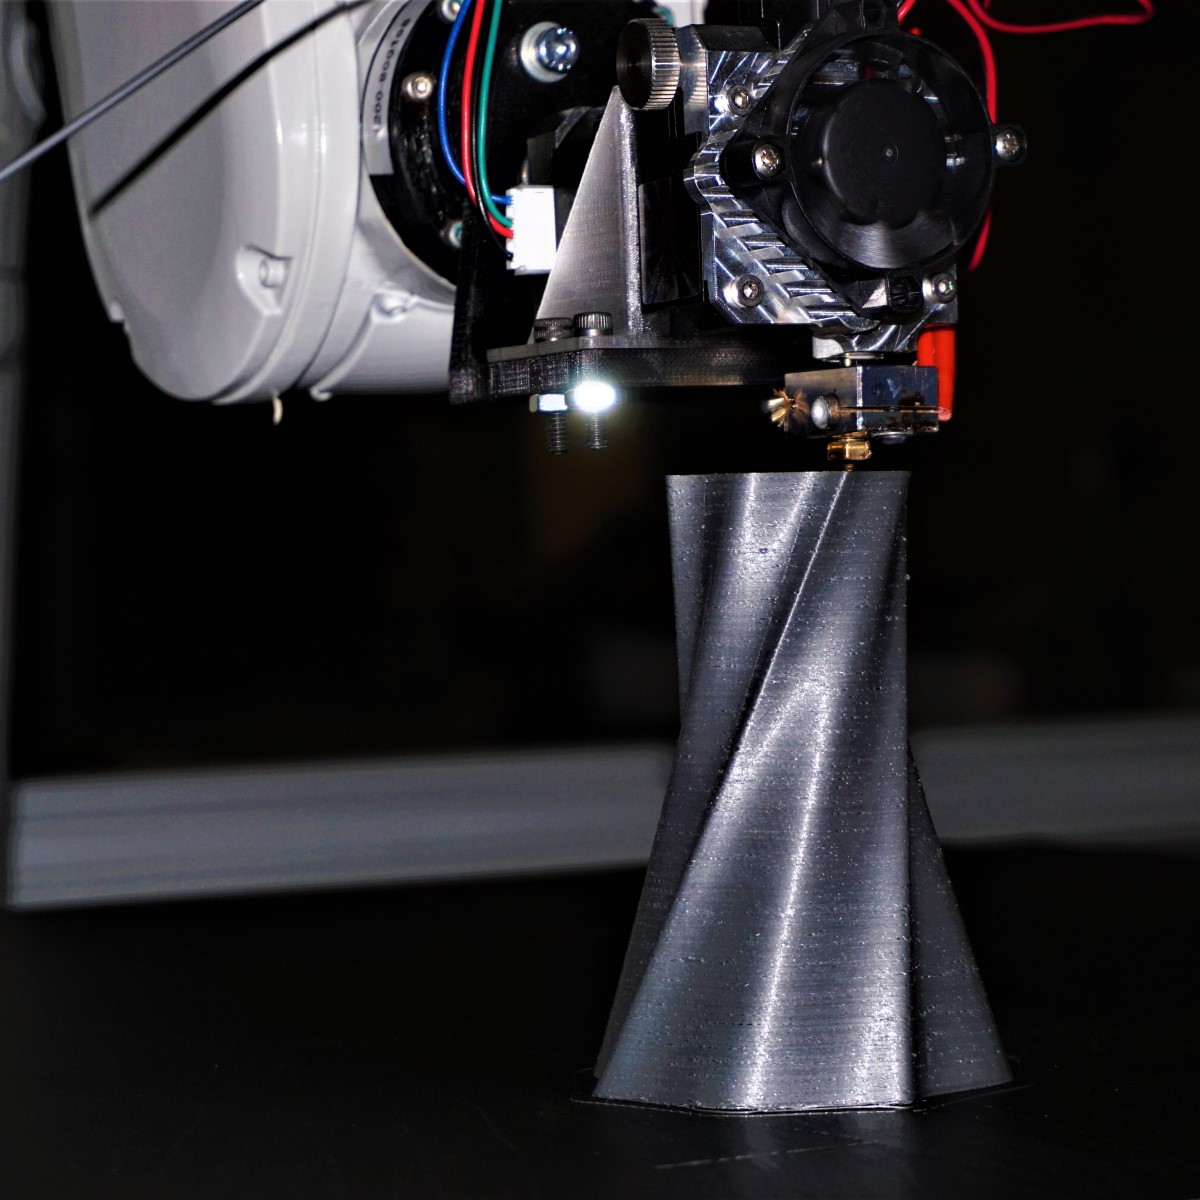 Robotic arm during printing a vase